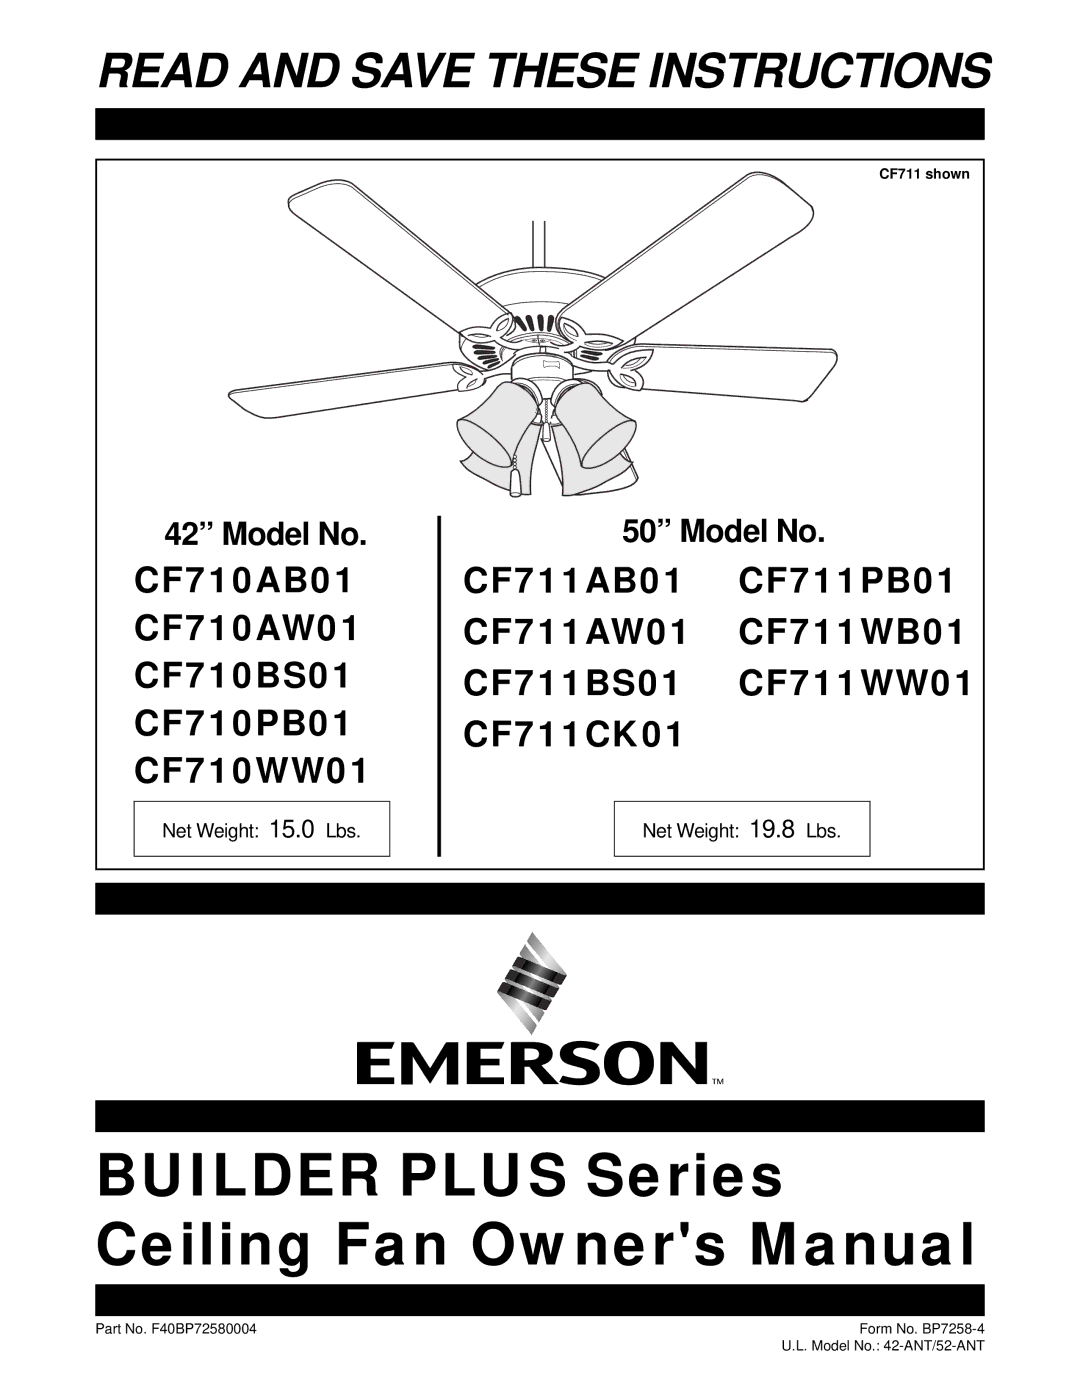 Emerson CF710AW01, CF710AB01, CF711WB01, CF711CK01, CF711WW01, CF711PB01 owner manual Read and Save These Instructions 